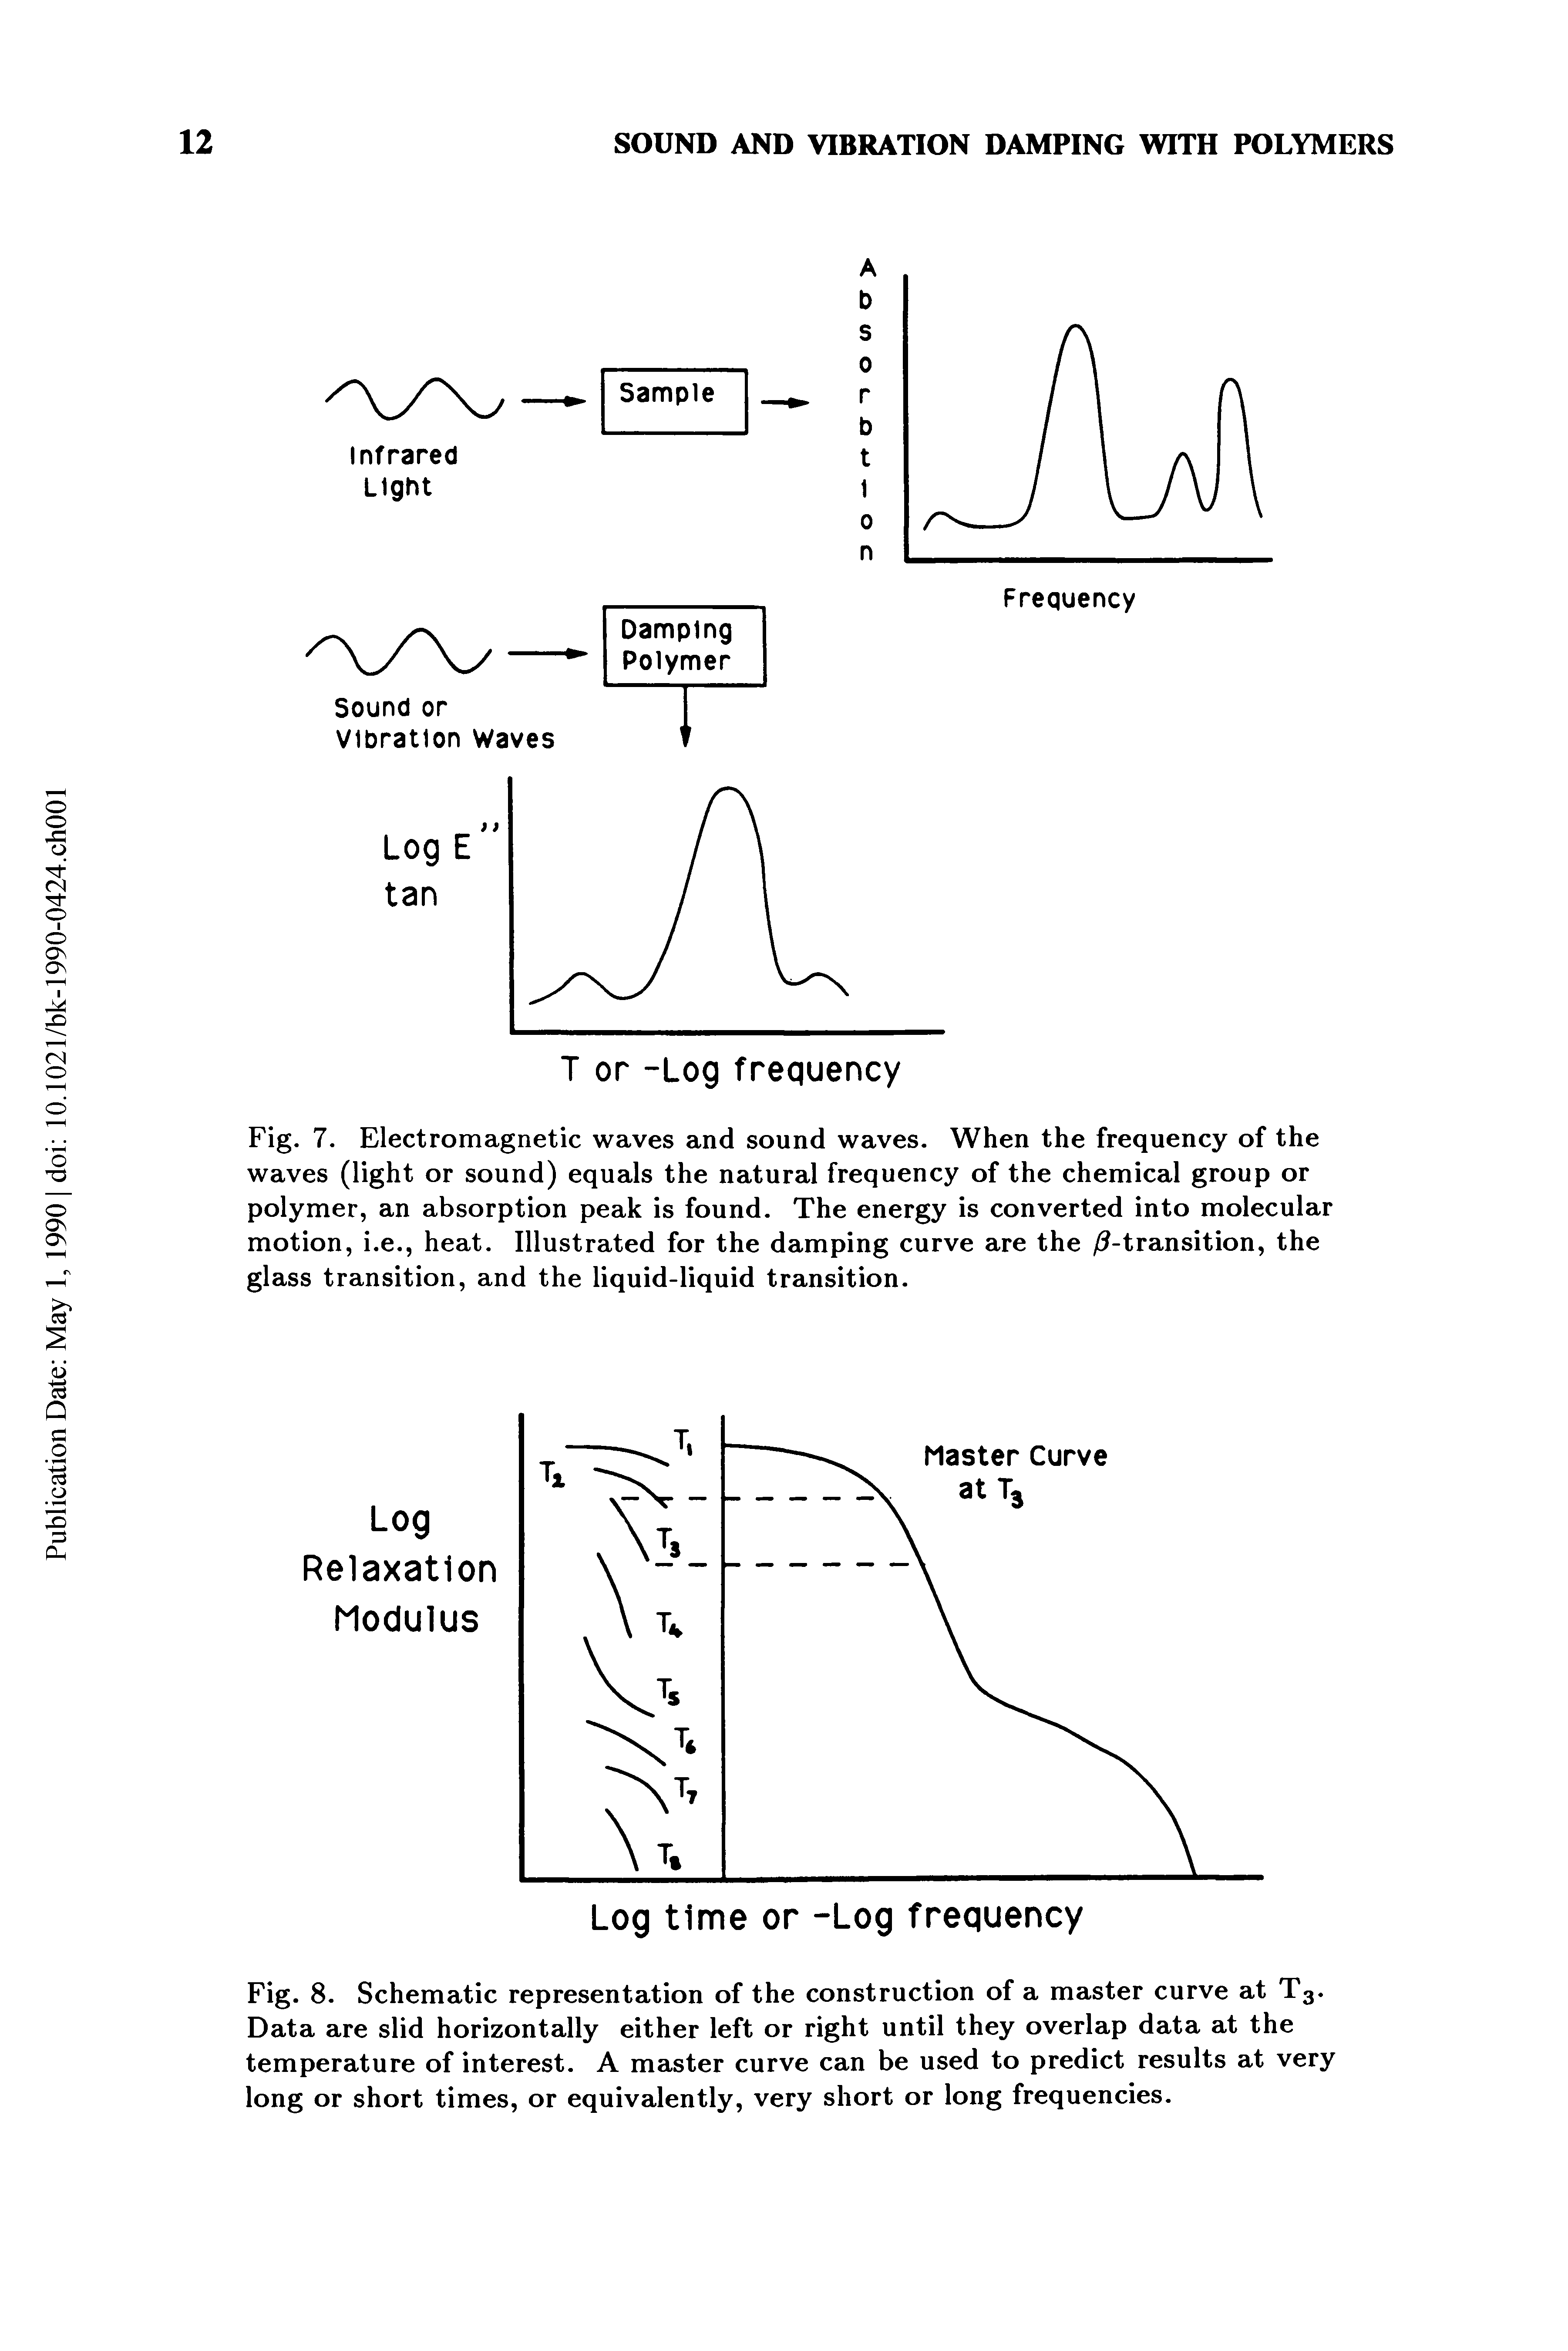 Fig. 7. Electromagnetic waves and sound waves. When the frequency of the waves (light or sound) equals the natural frequency of the chemical group or polymer, an absorption peak is found. The energy is converted into molecular motion, i.e., heat. Illustrated for the damping curve are the / -transition, the glass transition, and the liquid-liquid transition.